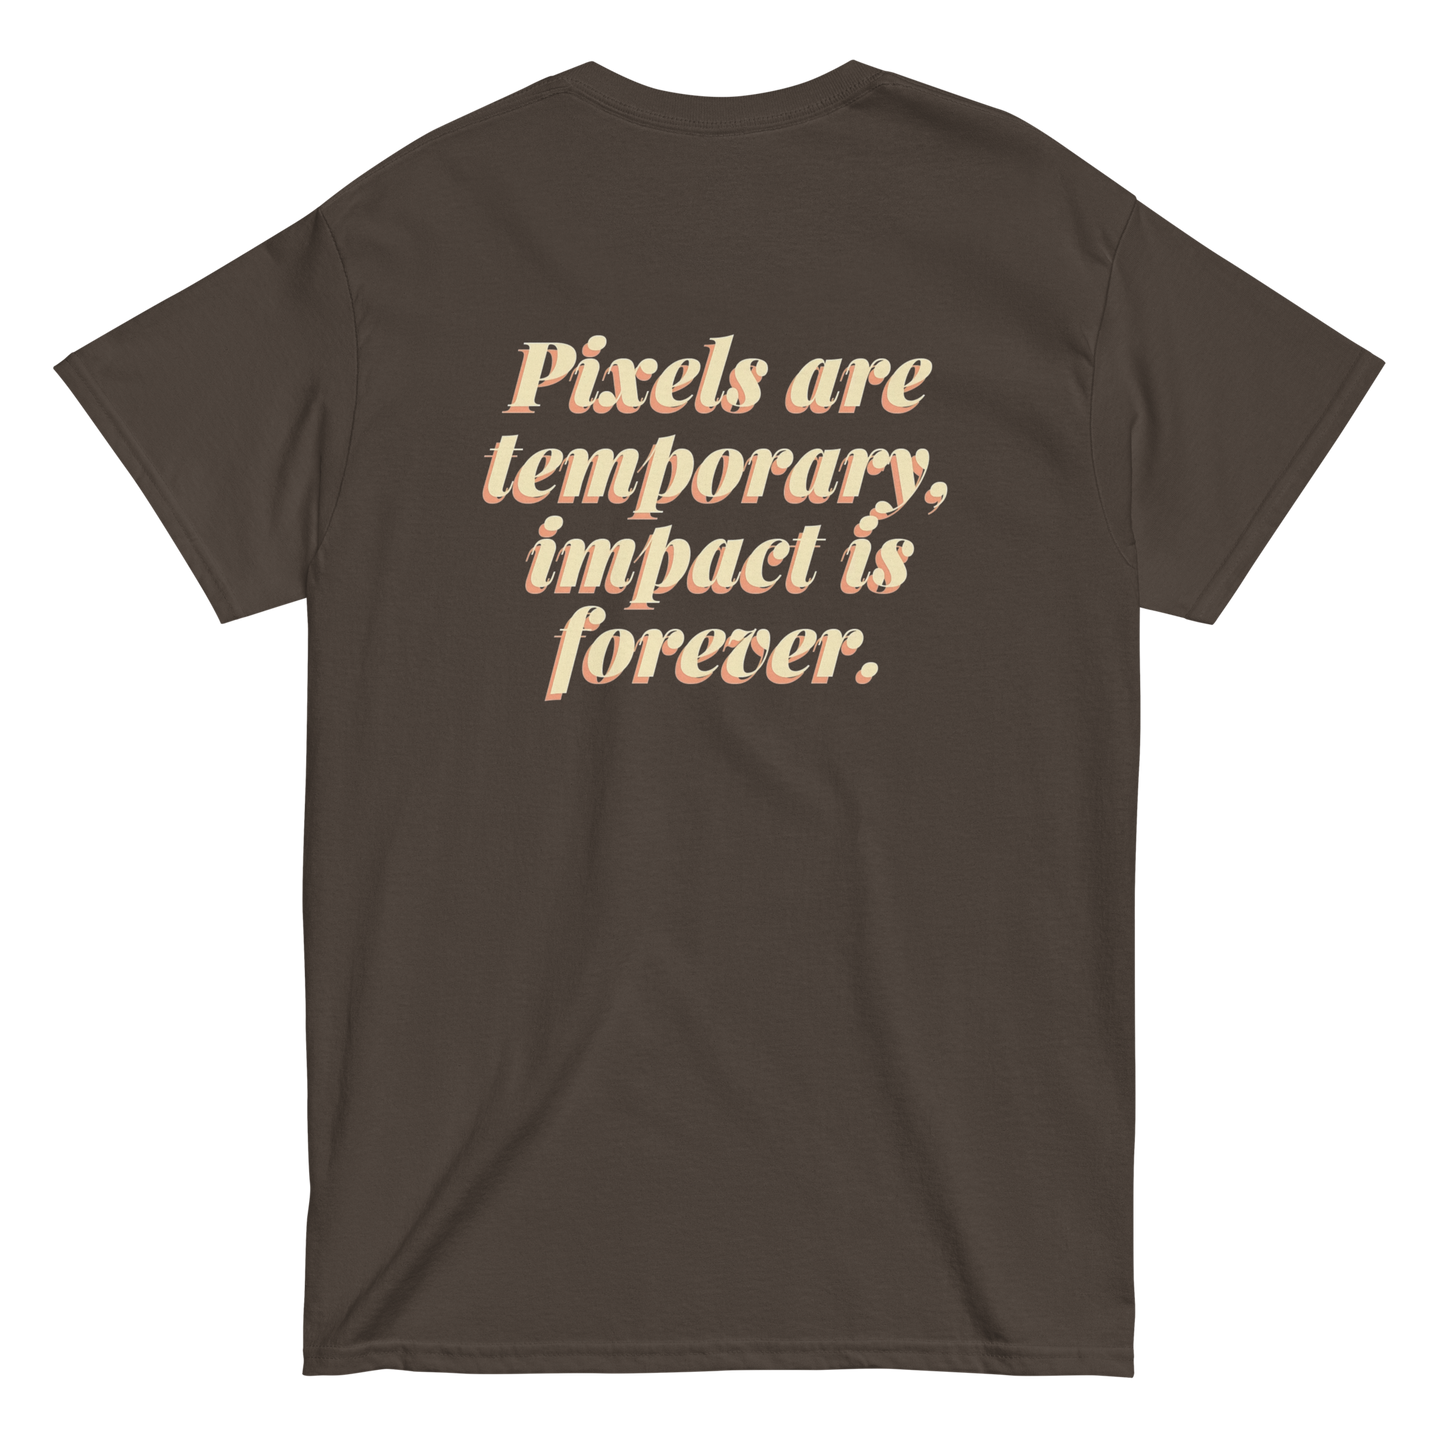 'Impact is forever' heavyweight tee